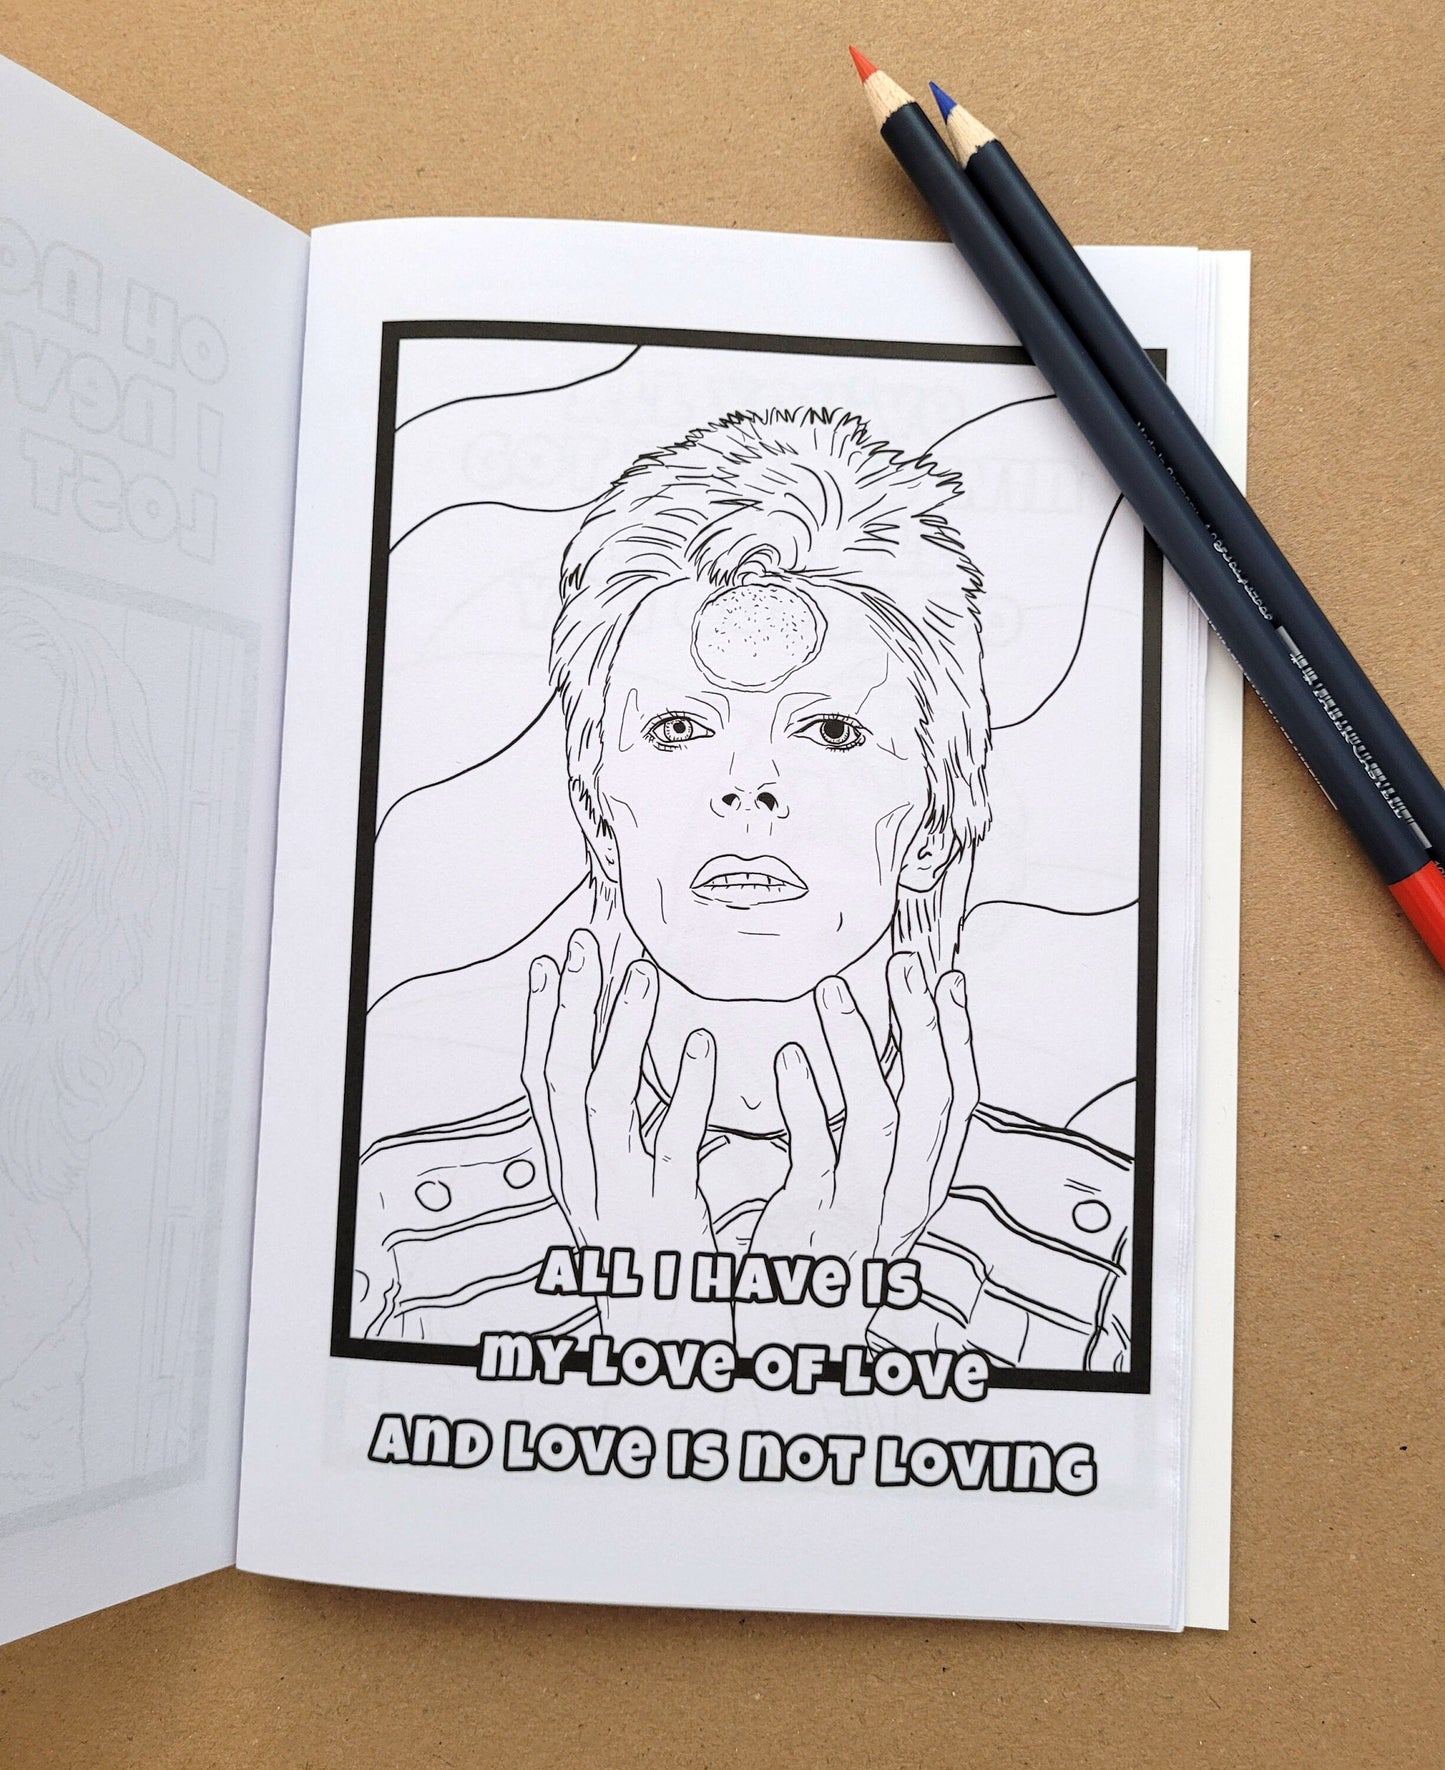 David Bowie Colouring Book, adult colouring book, gift for David Bowie fan, activity book, birthday gift, david bowie artwork